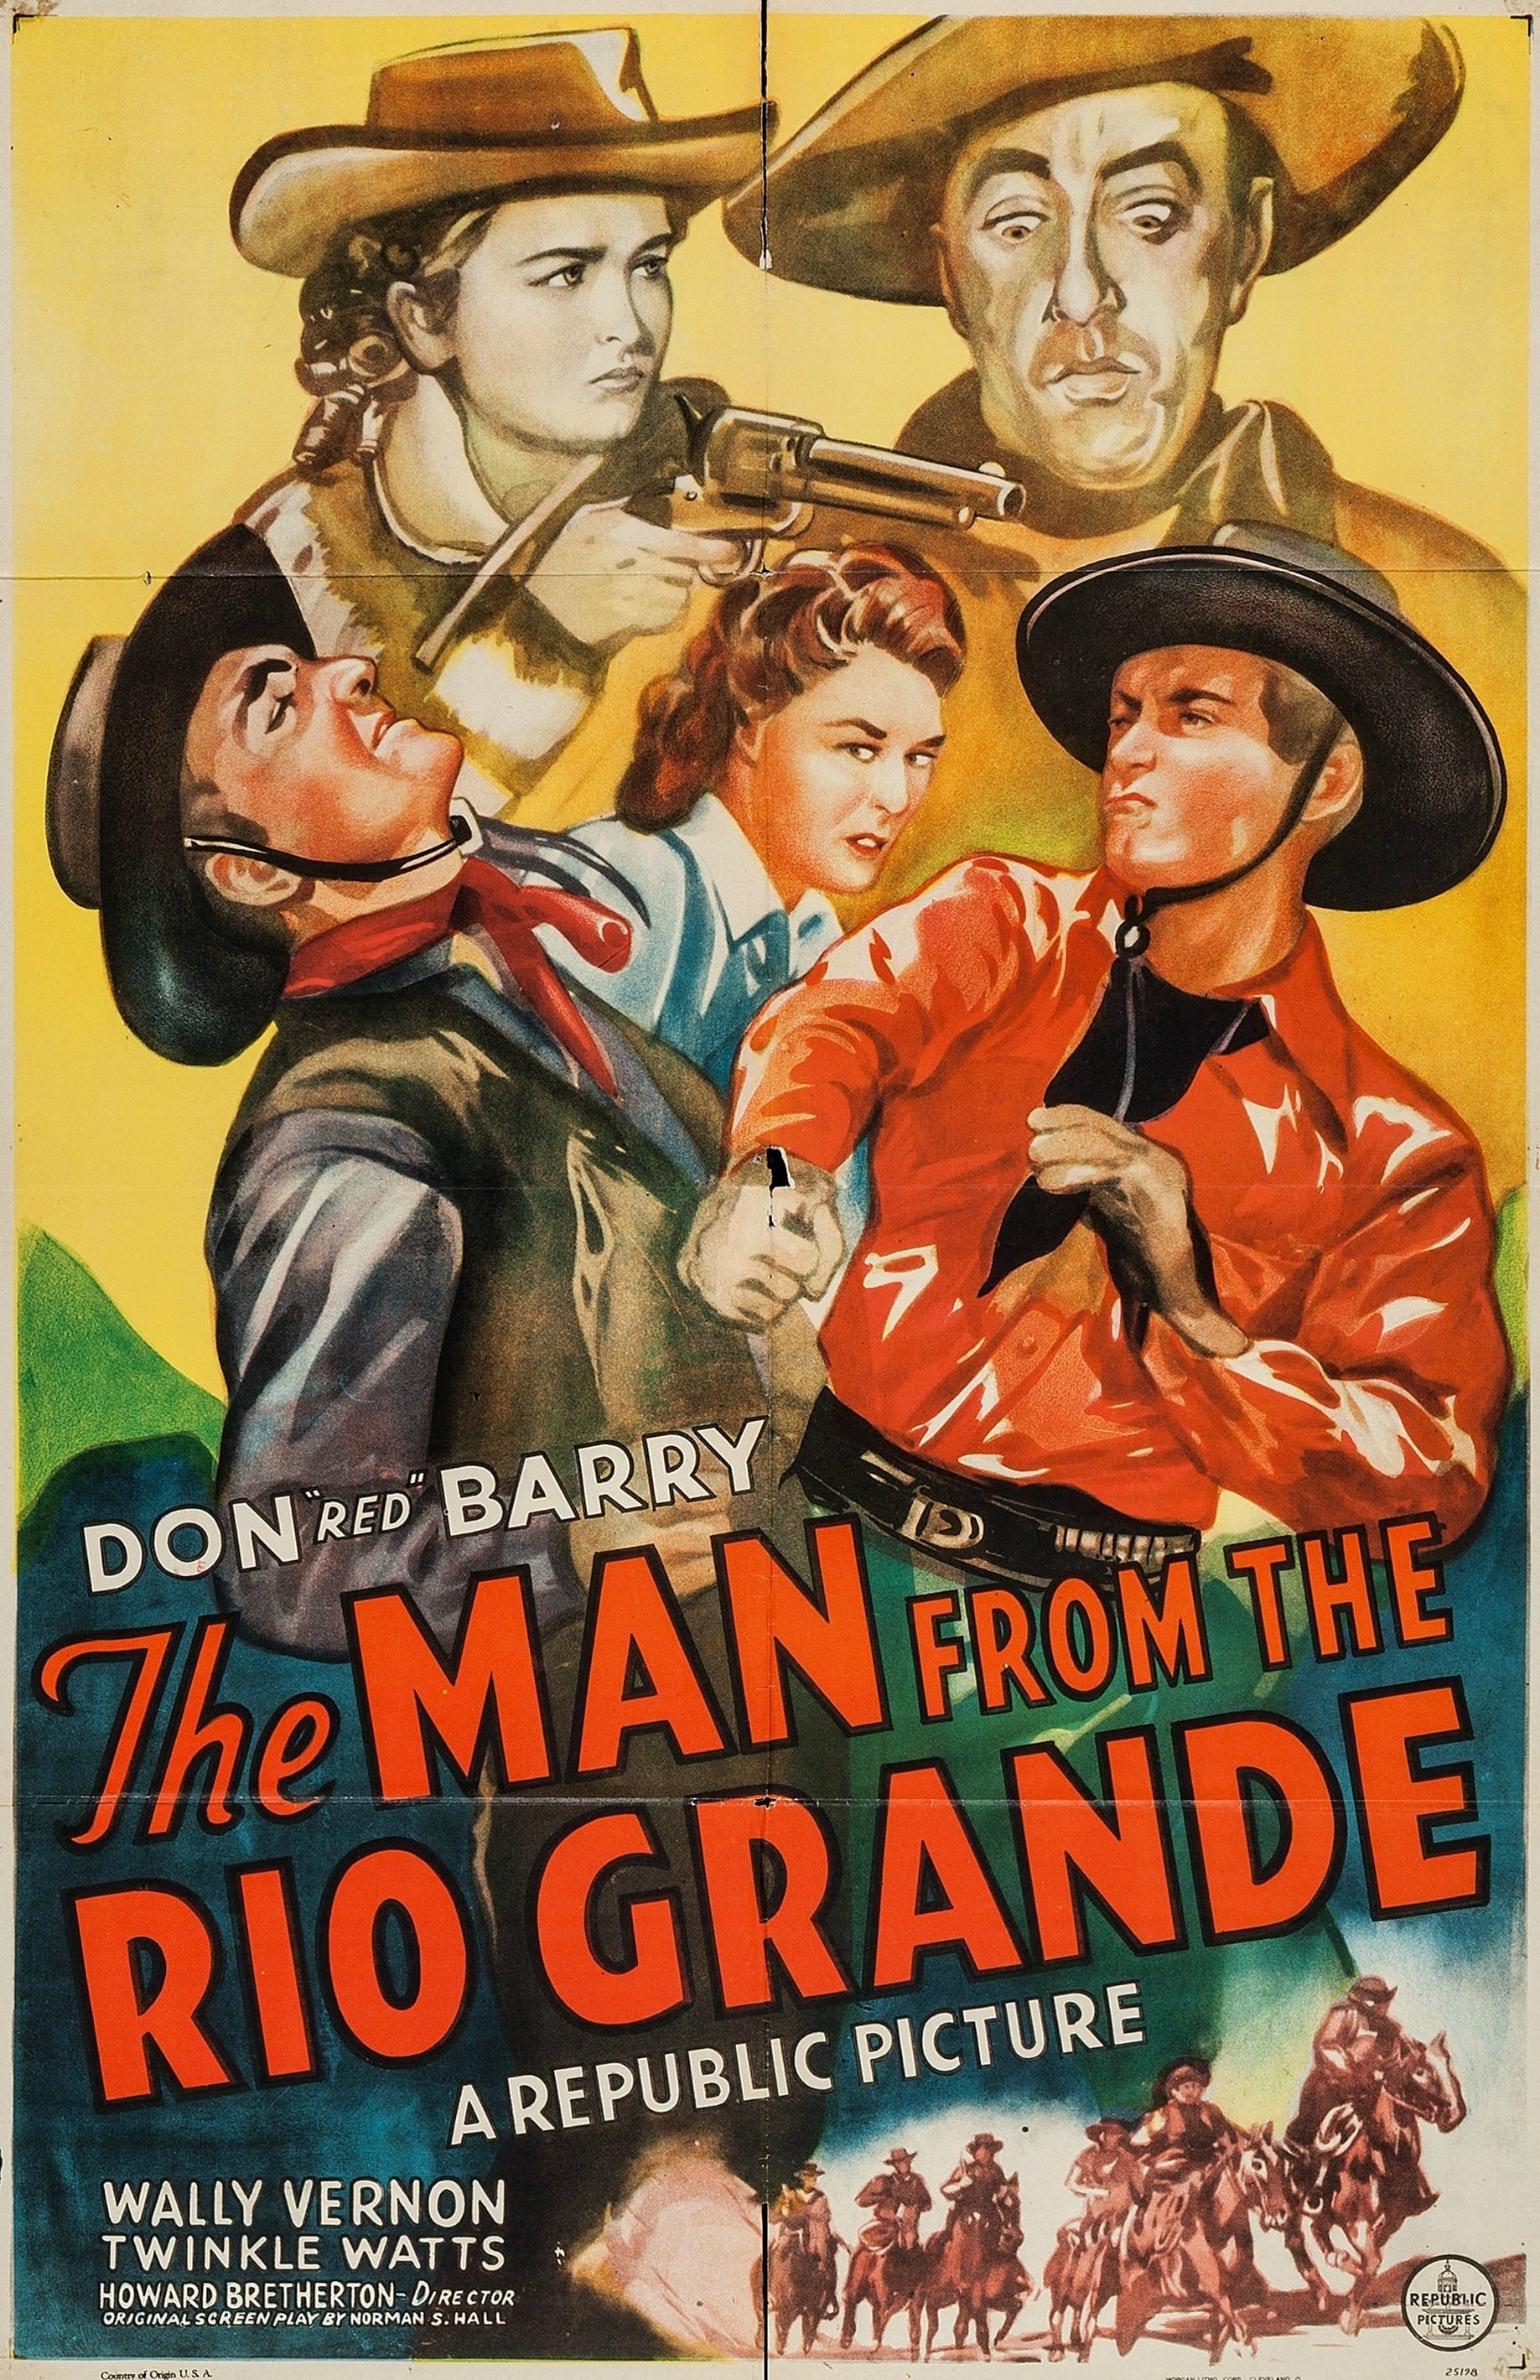 The Man from the Rio Grande (1943)